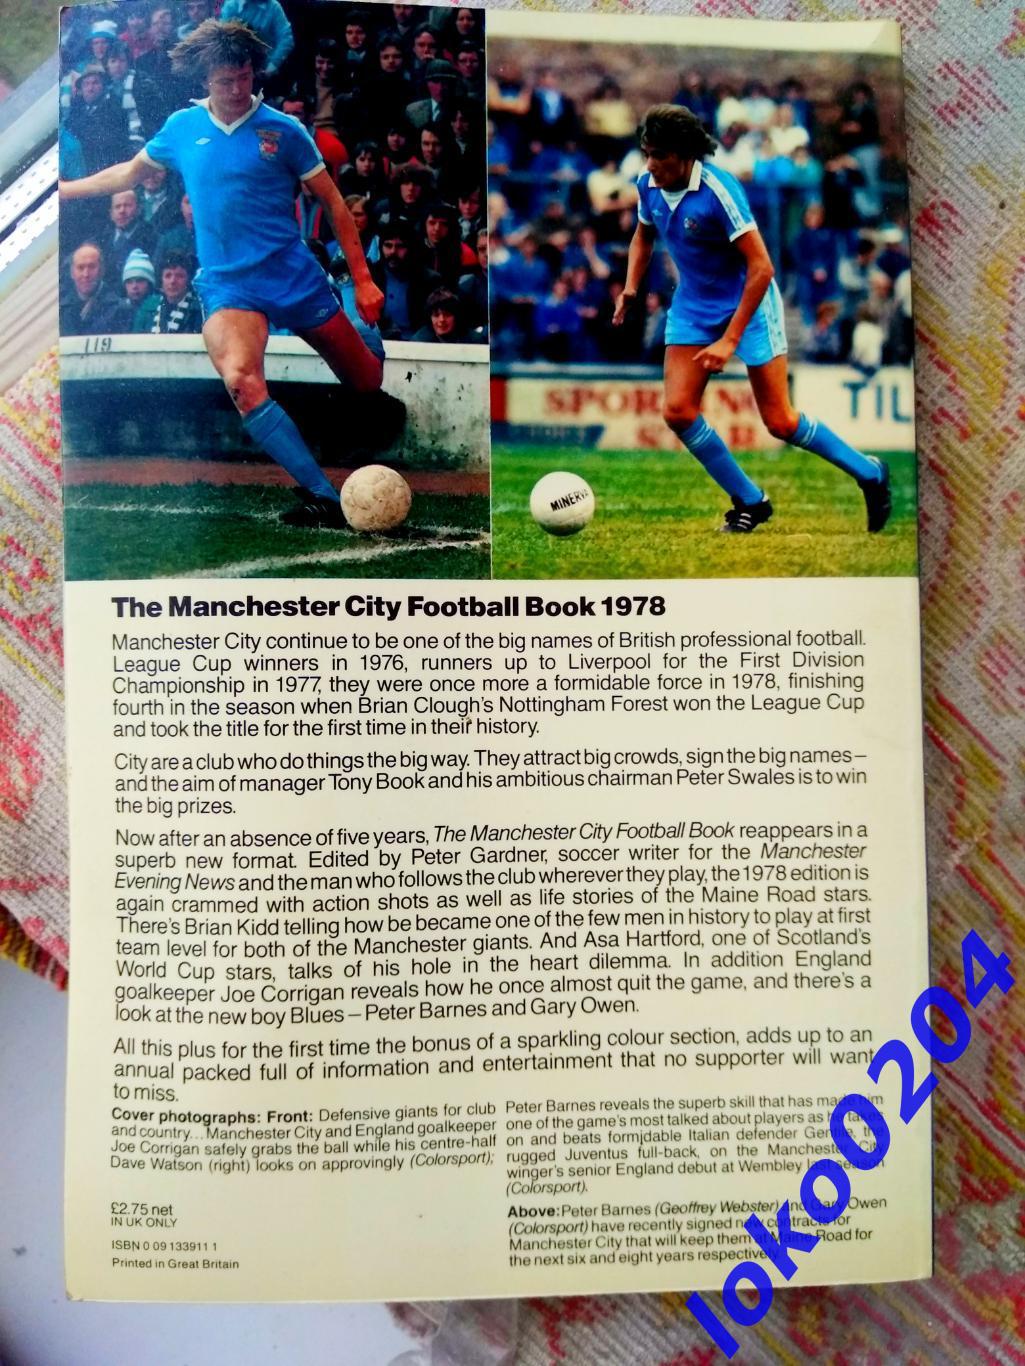 THE MANCHESTER CITY FOOTBALL BOOK 1978. 2